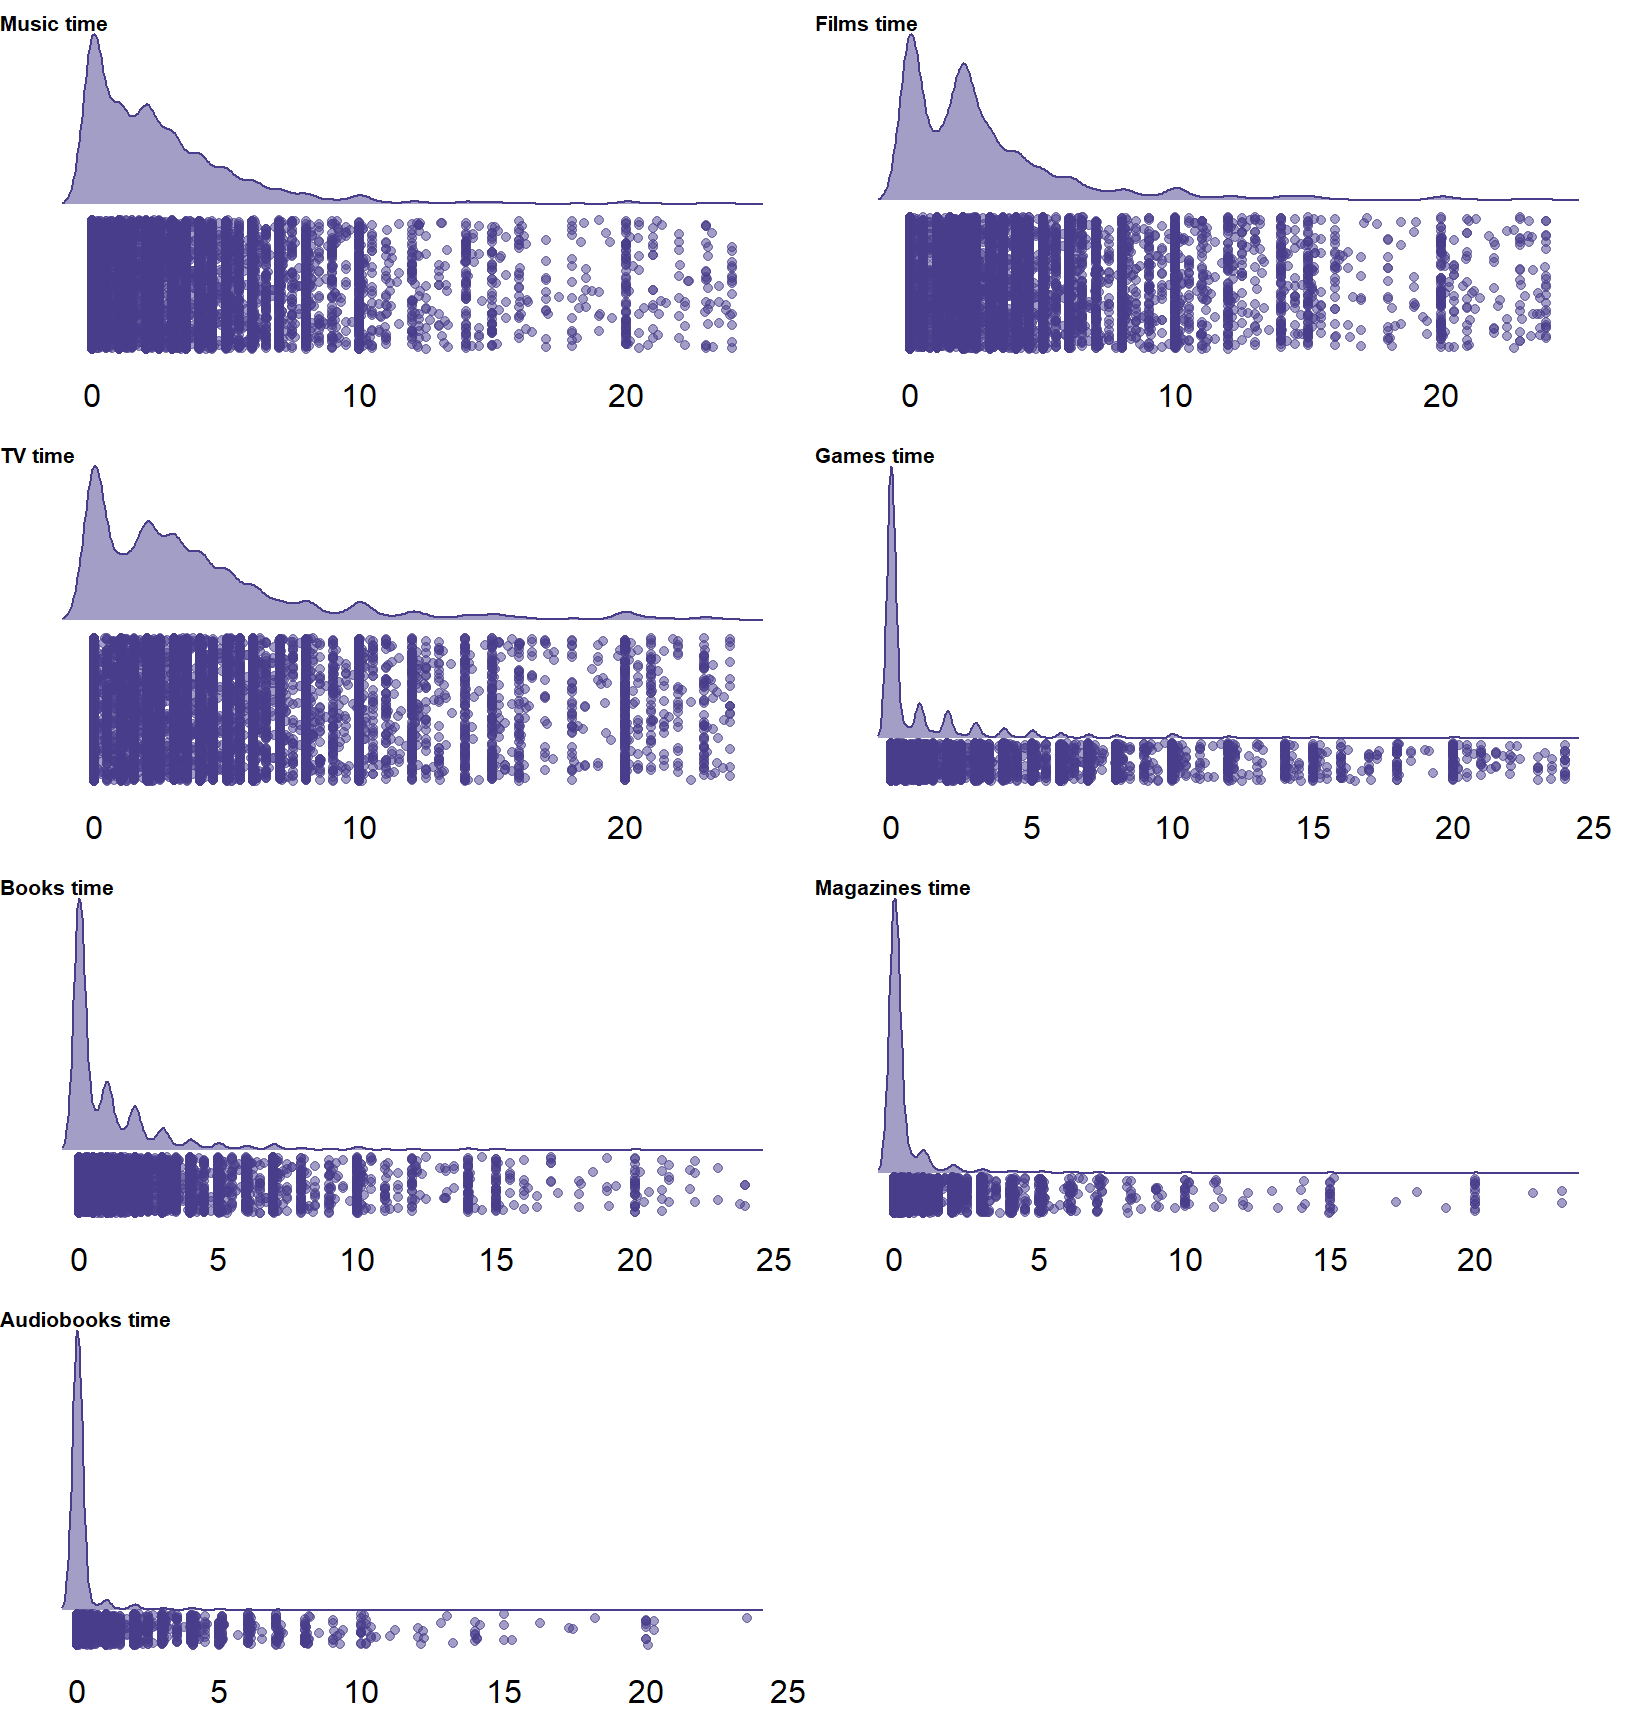 Distribution of self-reported time per medium